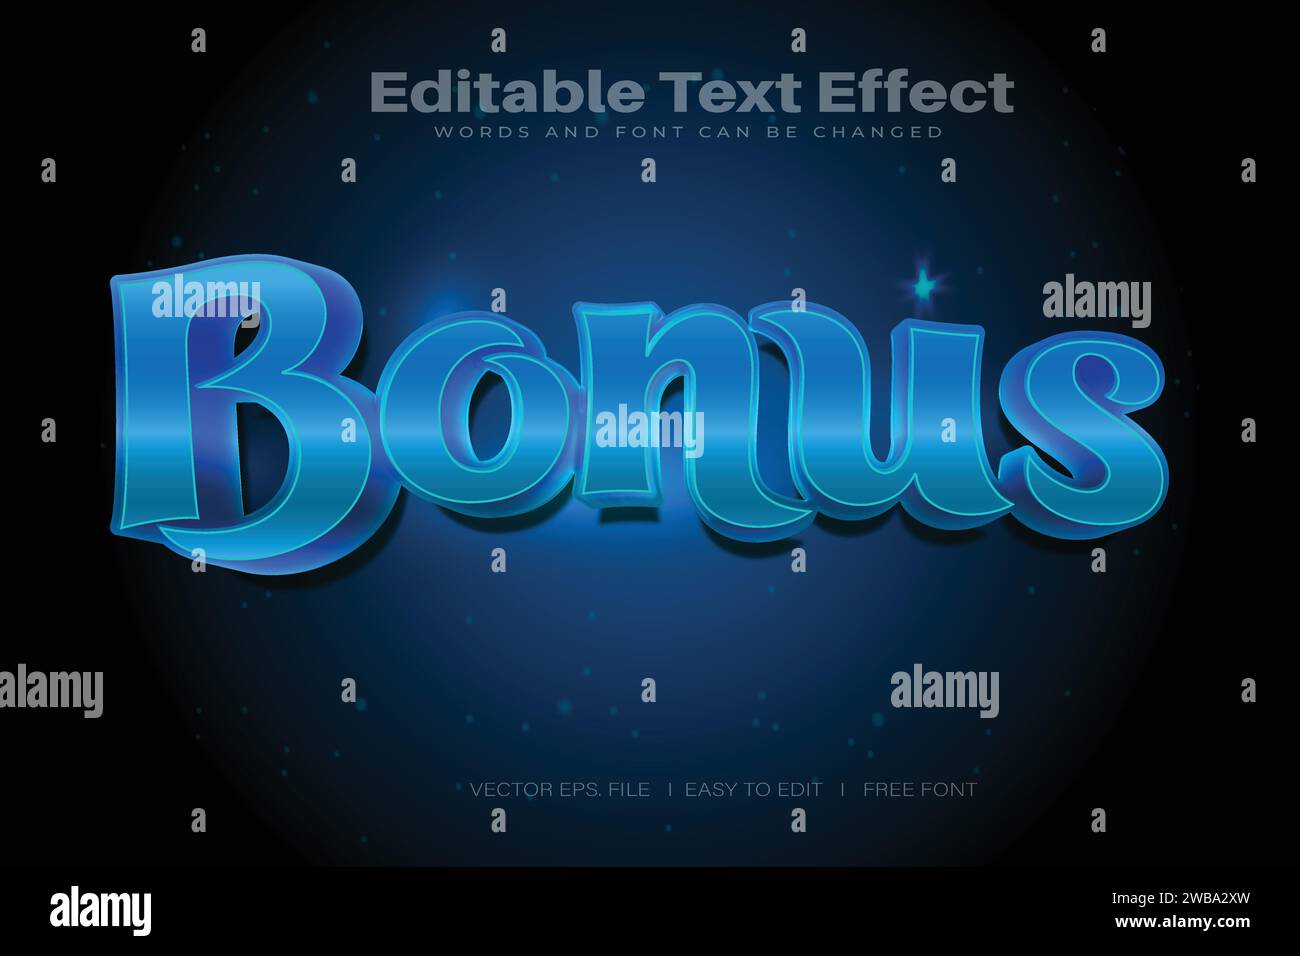 Vector Bonus 3d text effect 100 editable eps file word and font can be changed Stock Vector